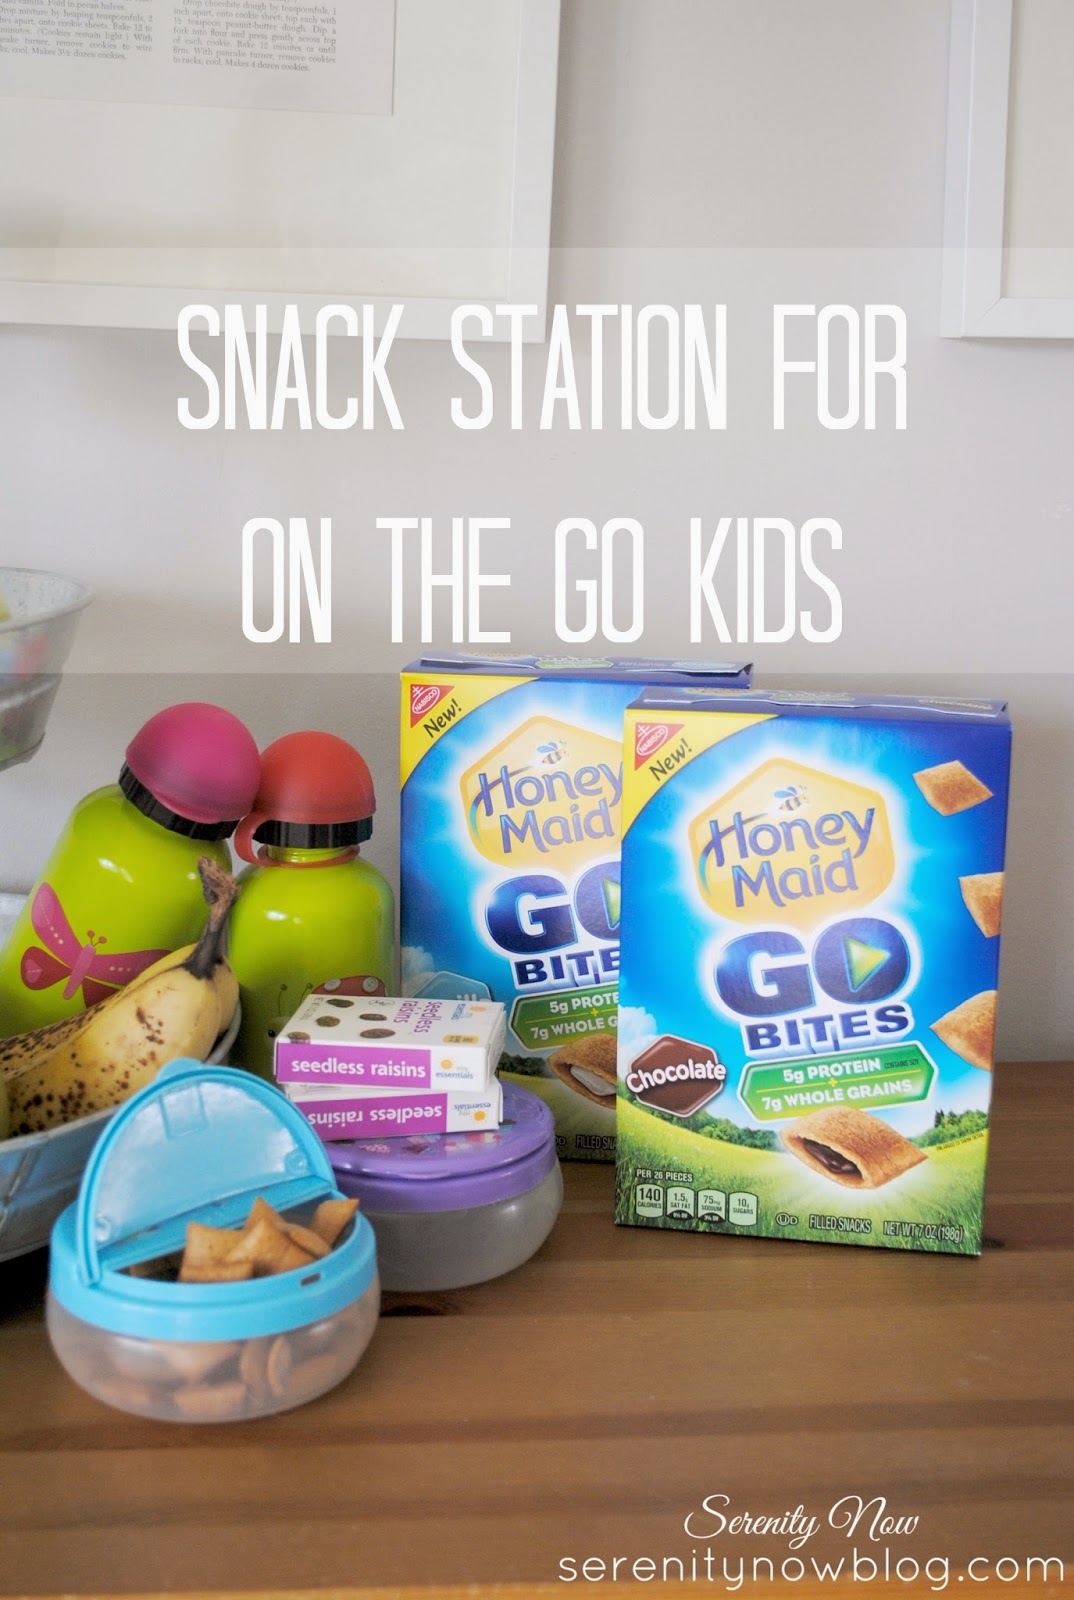 Setting Up a Snack Station for Busy "On the Go" Days, from Serenity Now